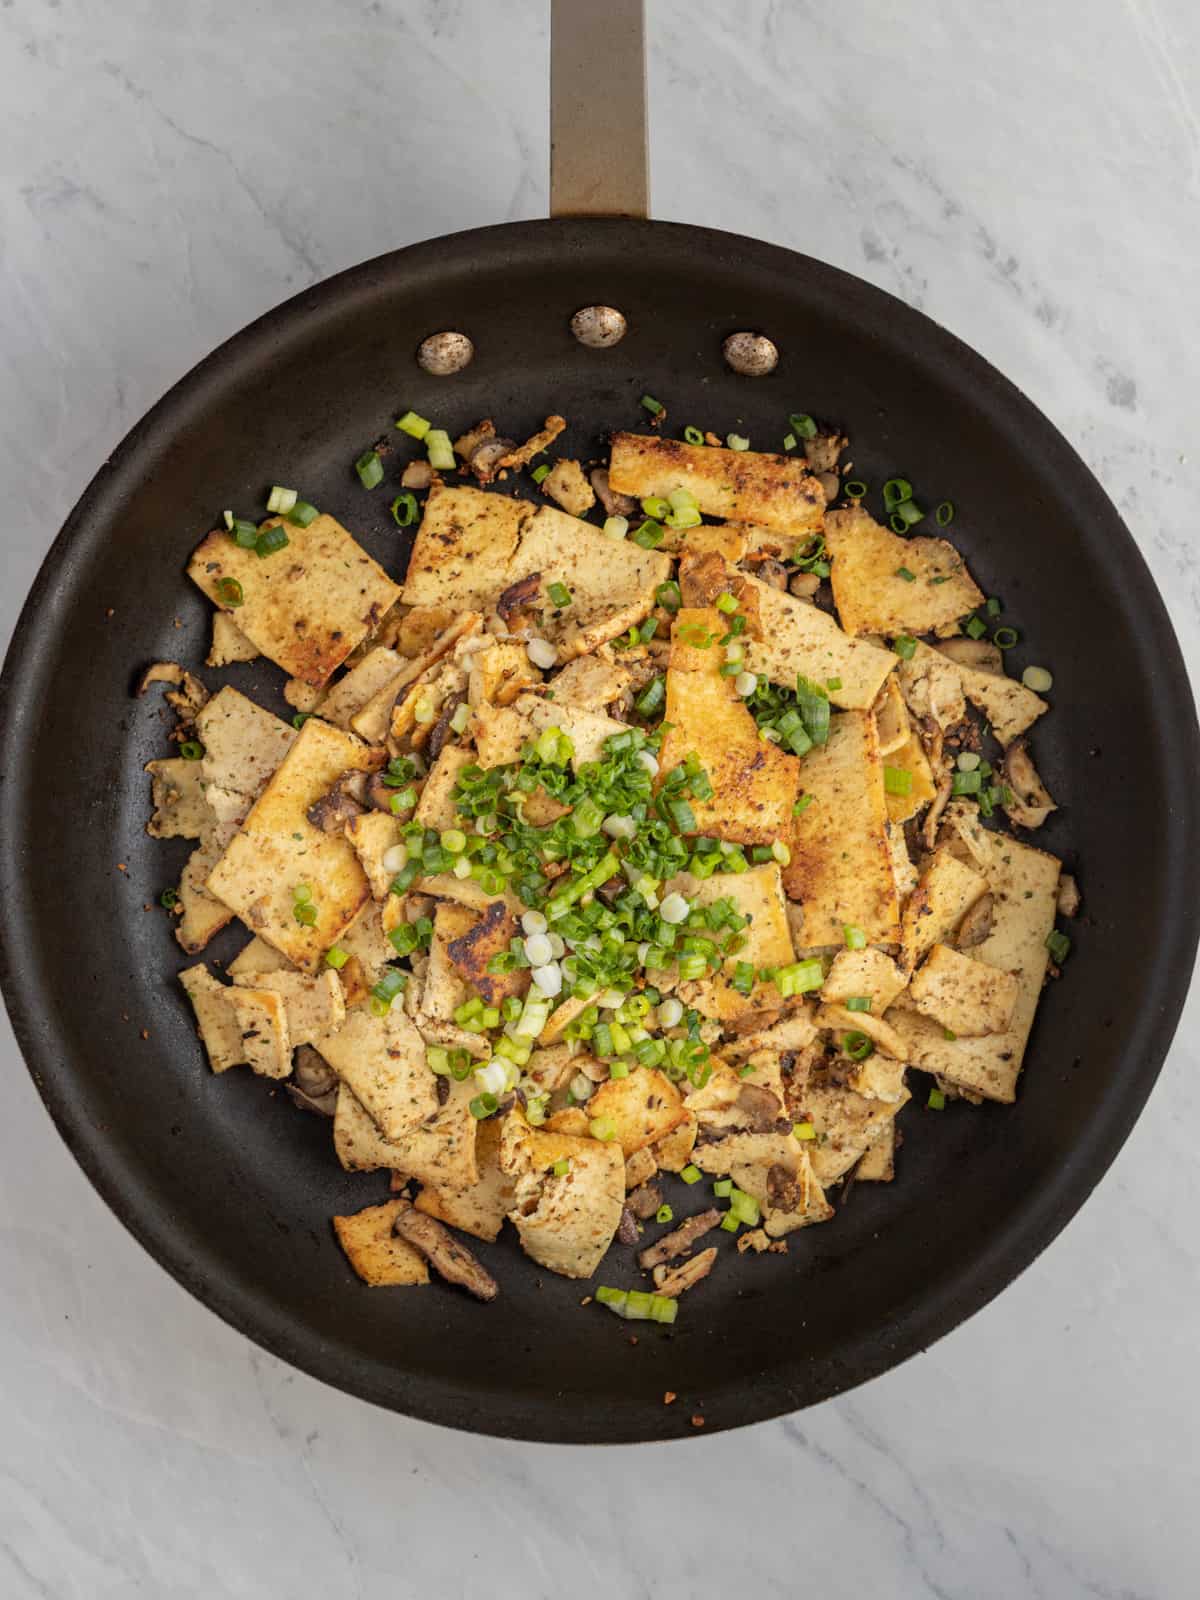 Large frying pan with cooked tofu and mushroom slices.